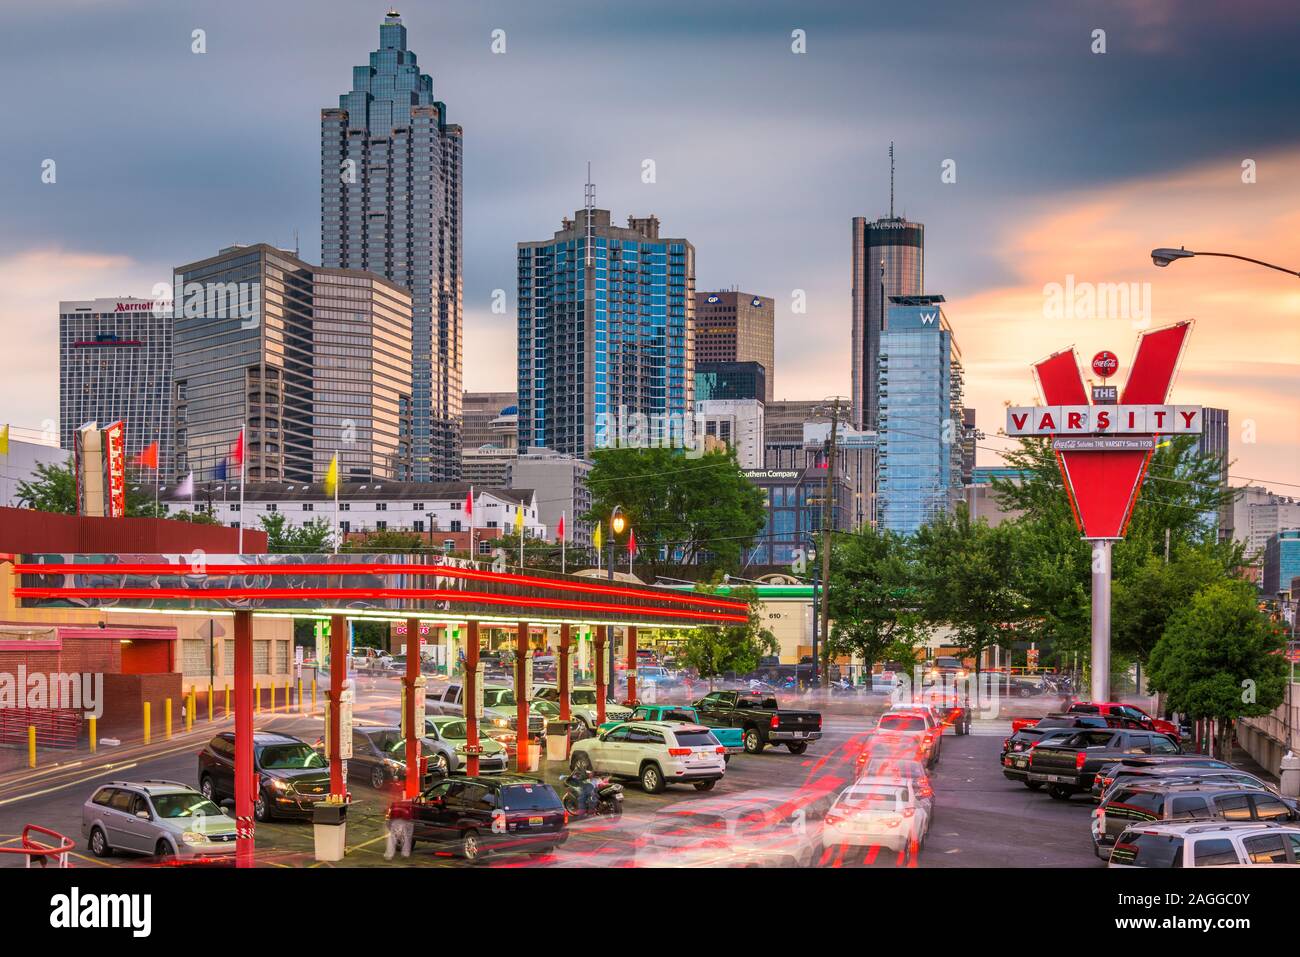 ATLANTA, GEORGIA - JUNE 25, 2017: Traffic forms at the Varsity in downtown Atlanta. The Varsity is an iconic fastfood restaurant chain with branches a Stock Photo